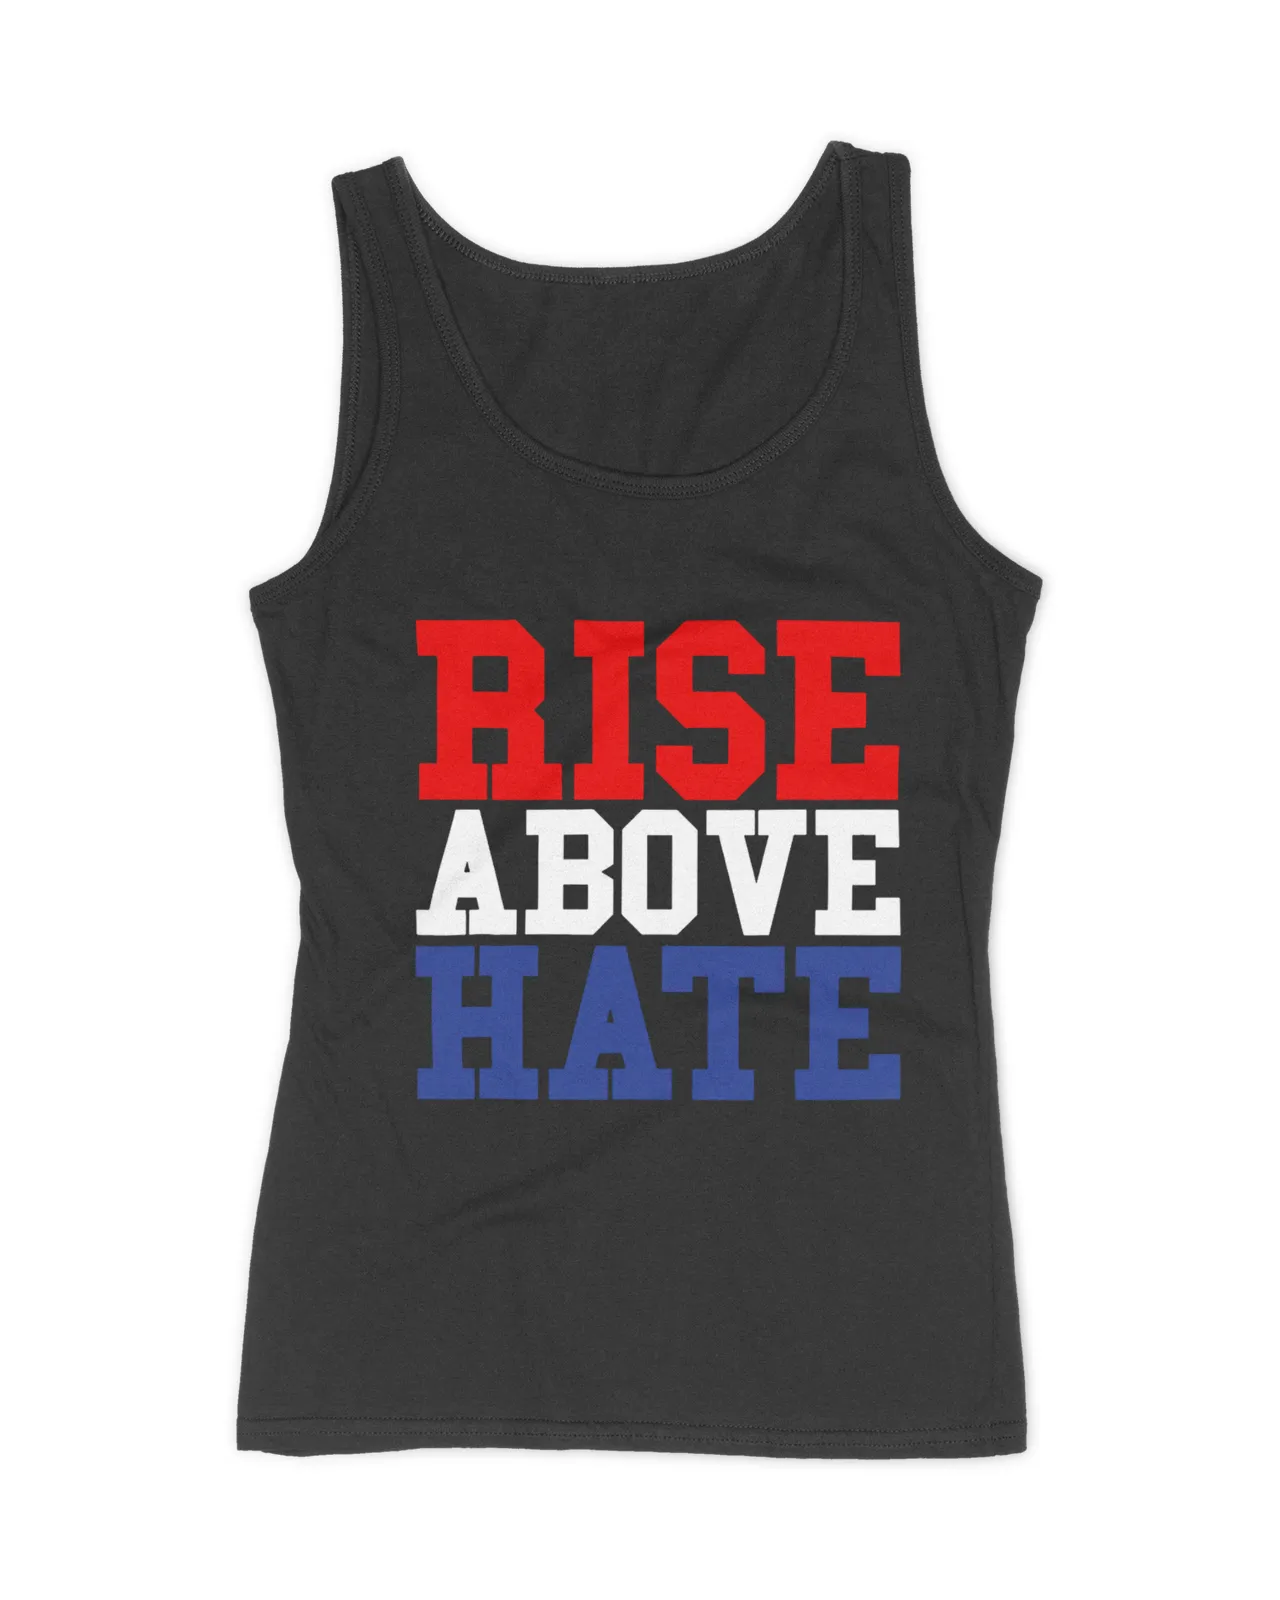 Rise Above Hate Shirt